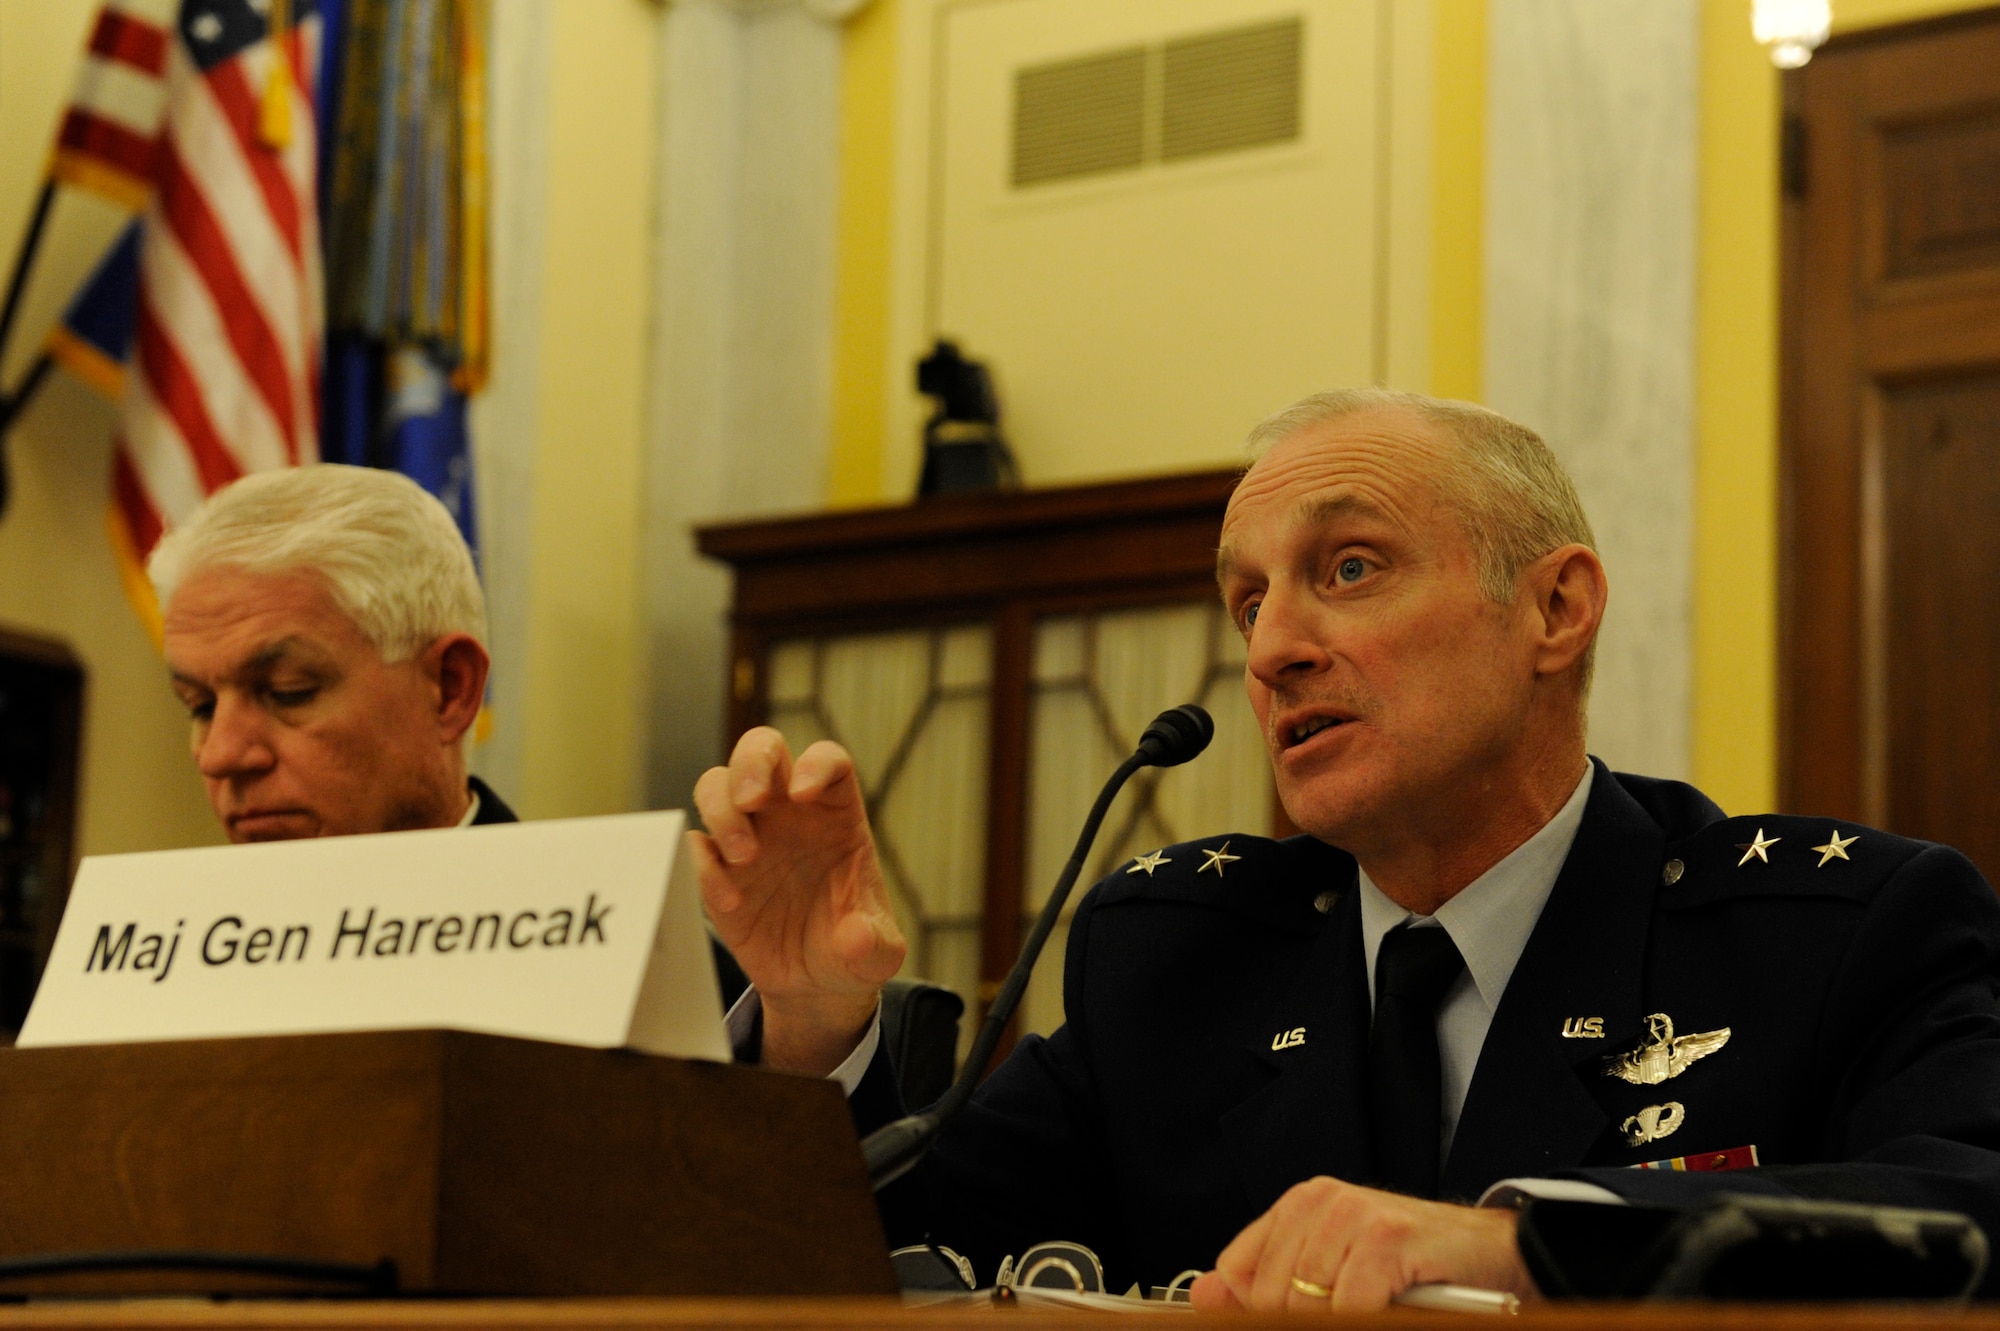 Maj. Gen. Garrett Harencak answers questions regarding the Air Force’s development status of the Long Range Strike-Bomber, during the Senate Armed Service Committee’s Subcommittee on Strategic Forces hearing on the status of the Air Force nuclear and strategic systems, March 5. Harencak is the Strategic Deterrence and Nuclear Integration assistant chief of staff, Washington, D.C. (U.S. Air Force photo by Staff Sgt. Carlin Leslie)